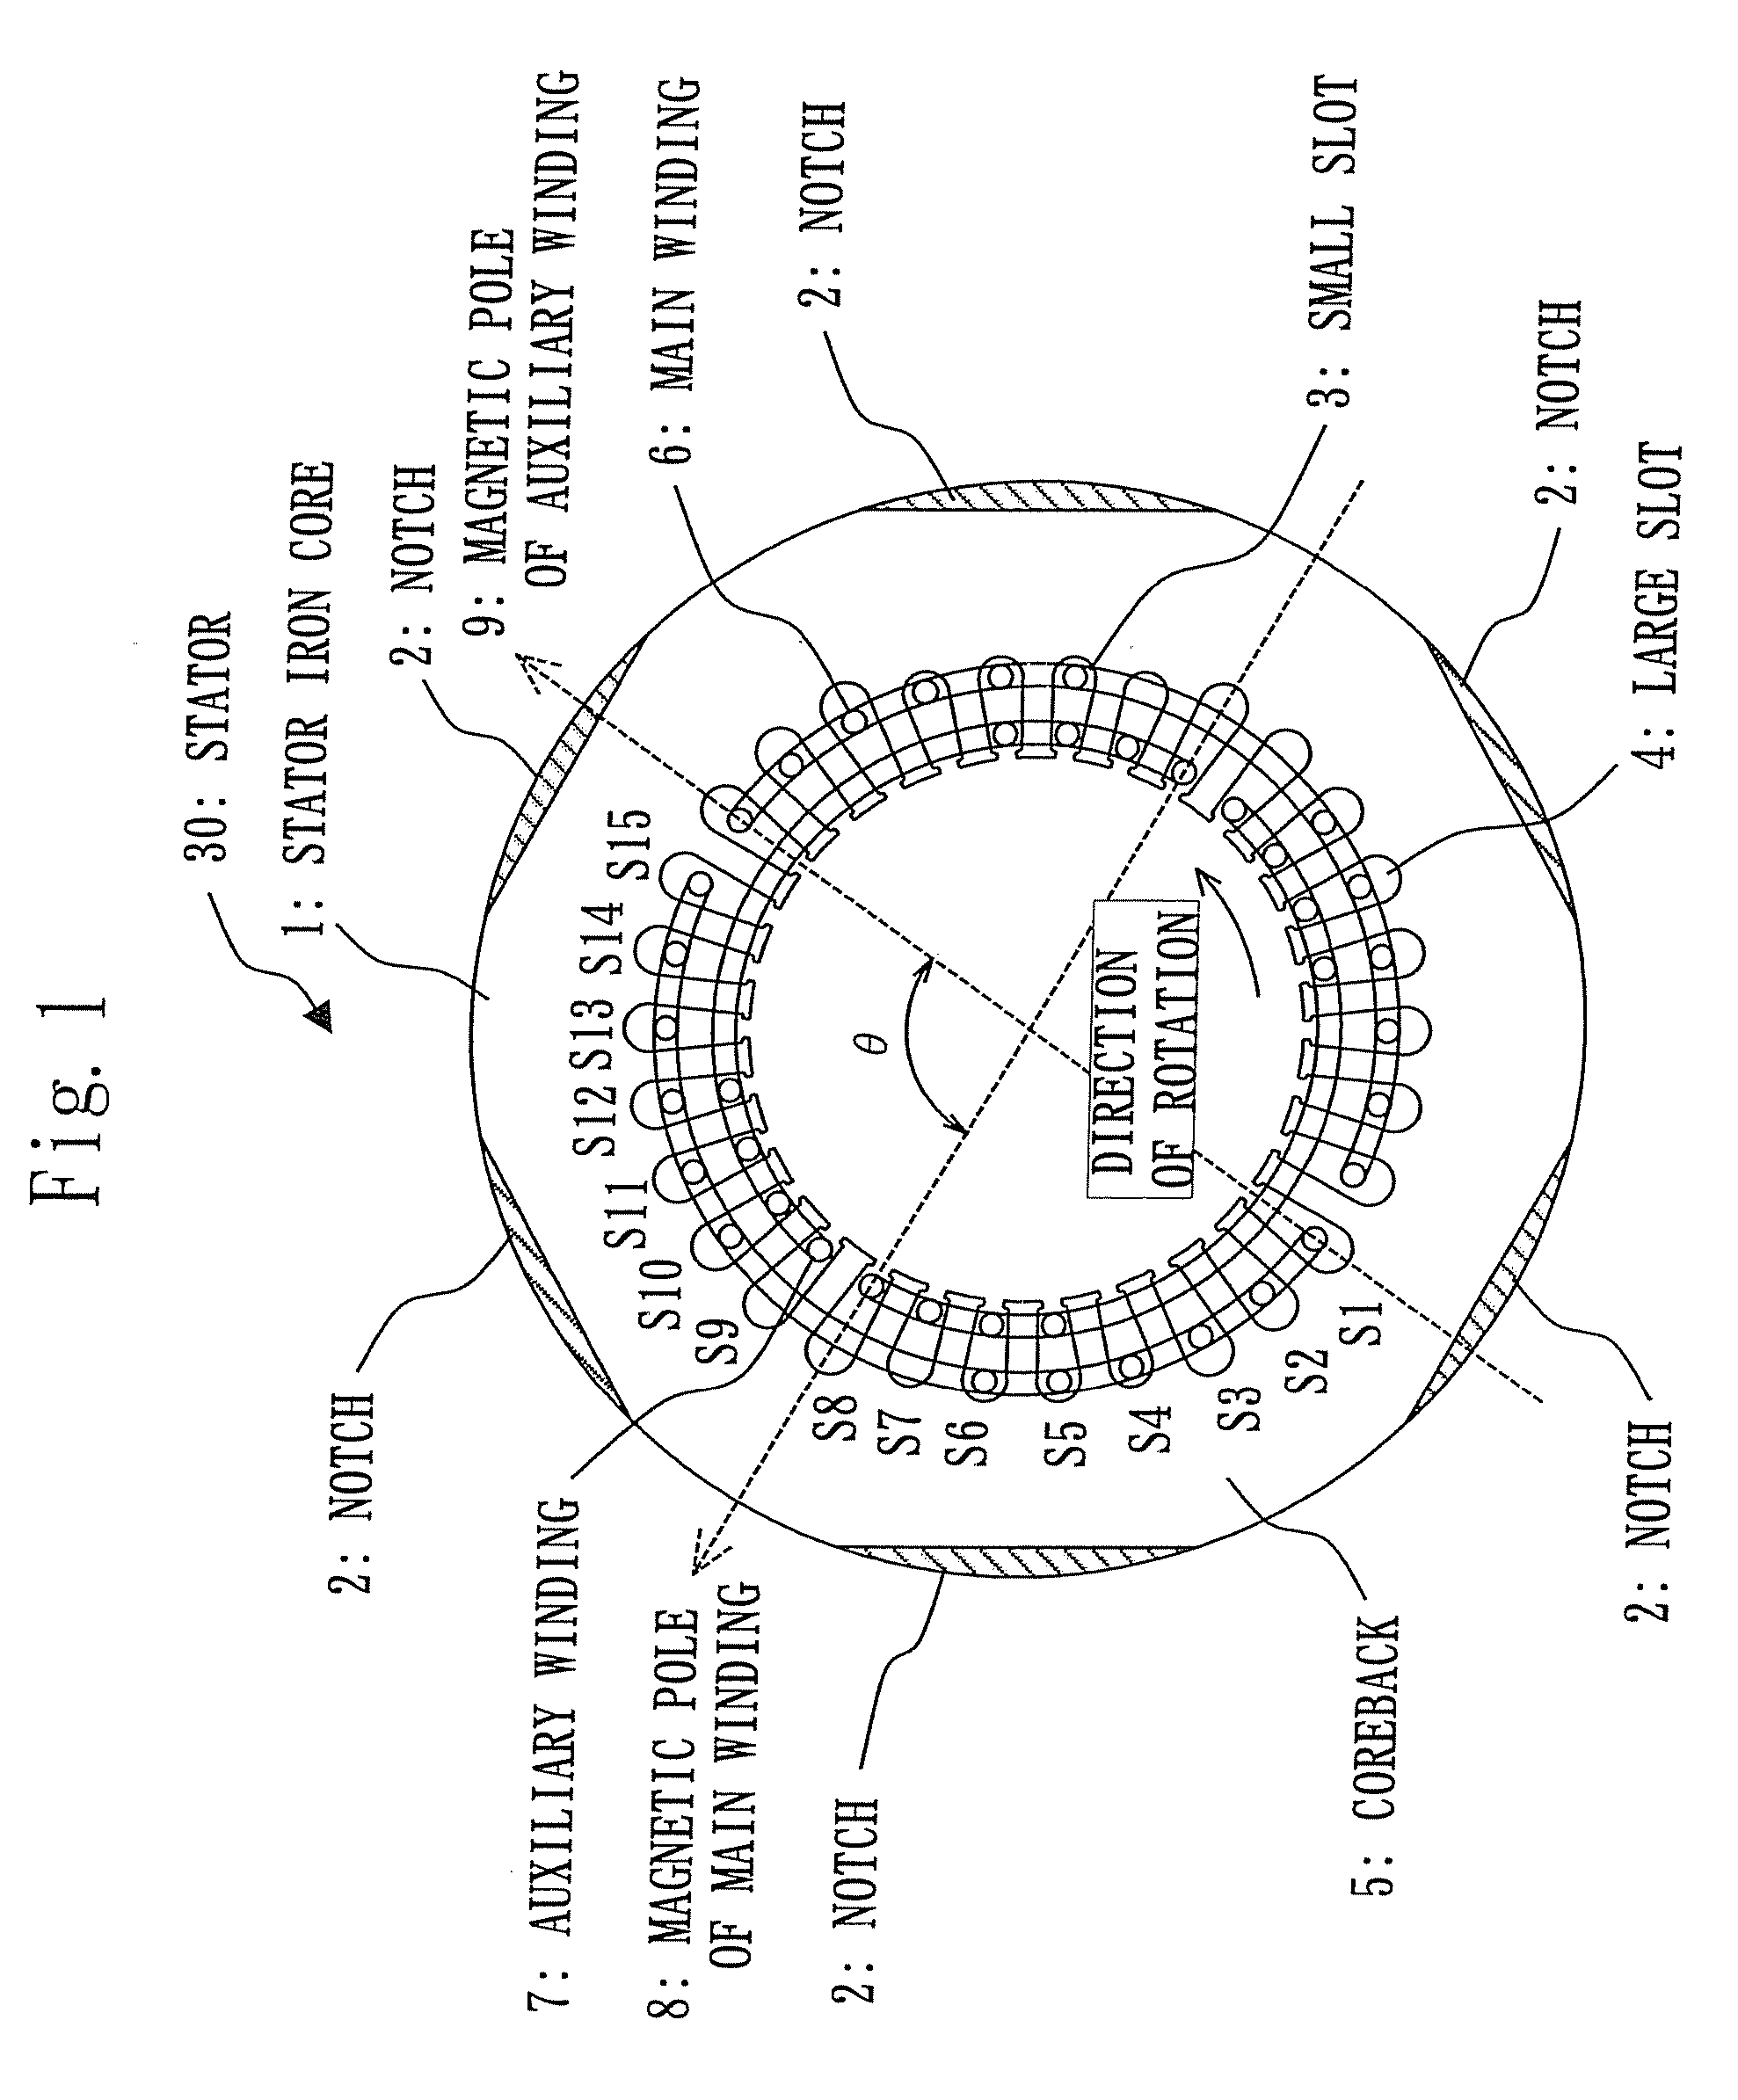 Single-phase motor and hermetic compressor